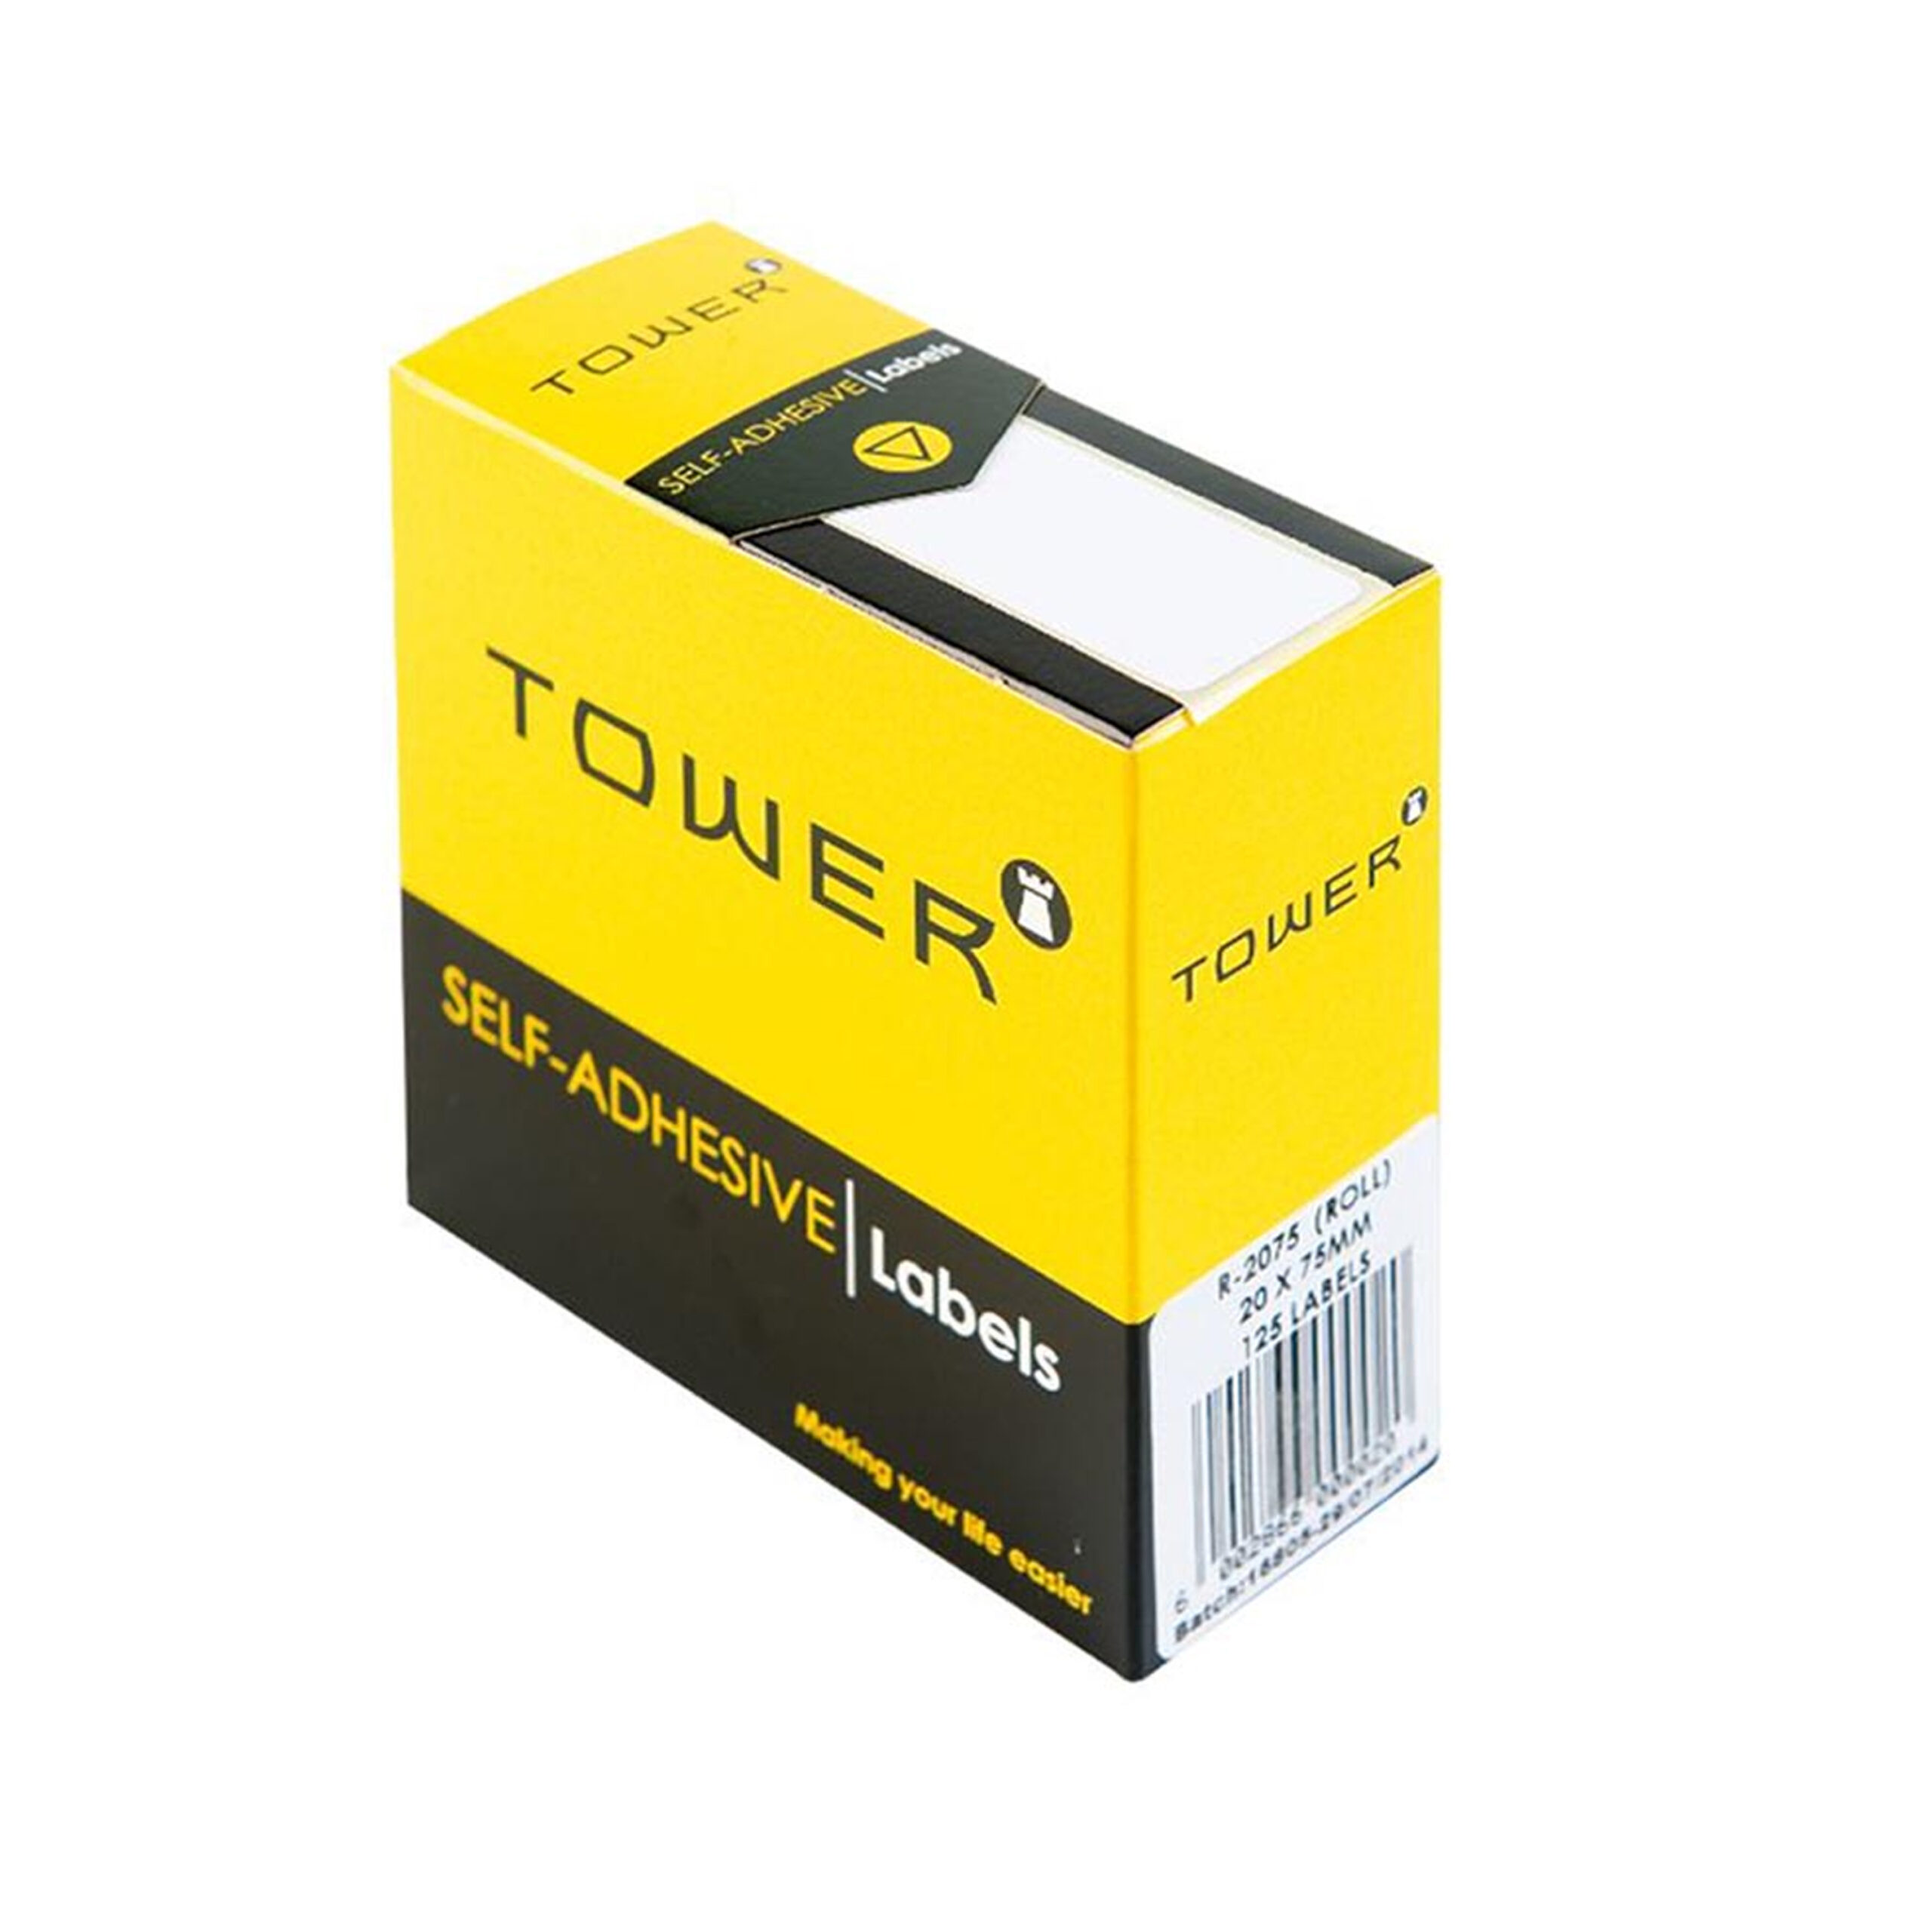 TOWER  SELF
ADHESIVE WHITE
LABELS  20x75mm 
(125 LABELS)